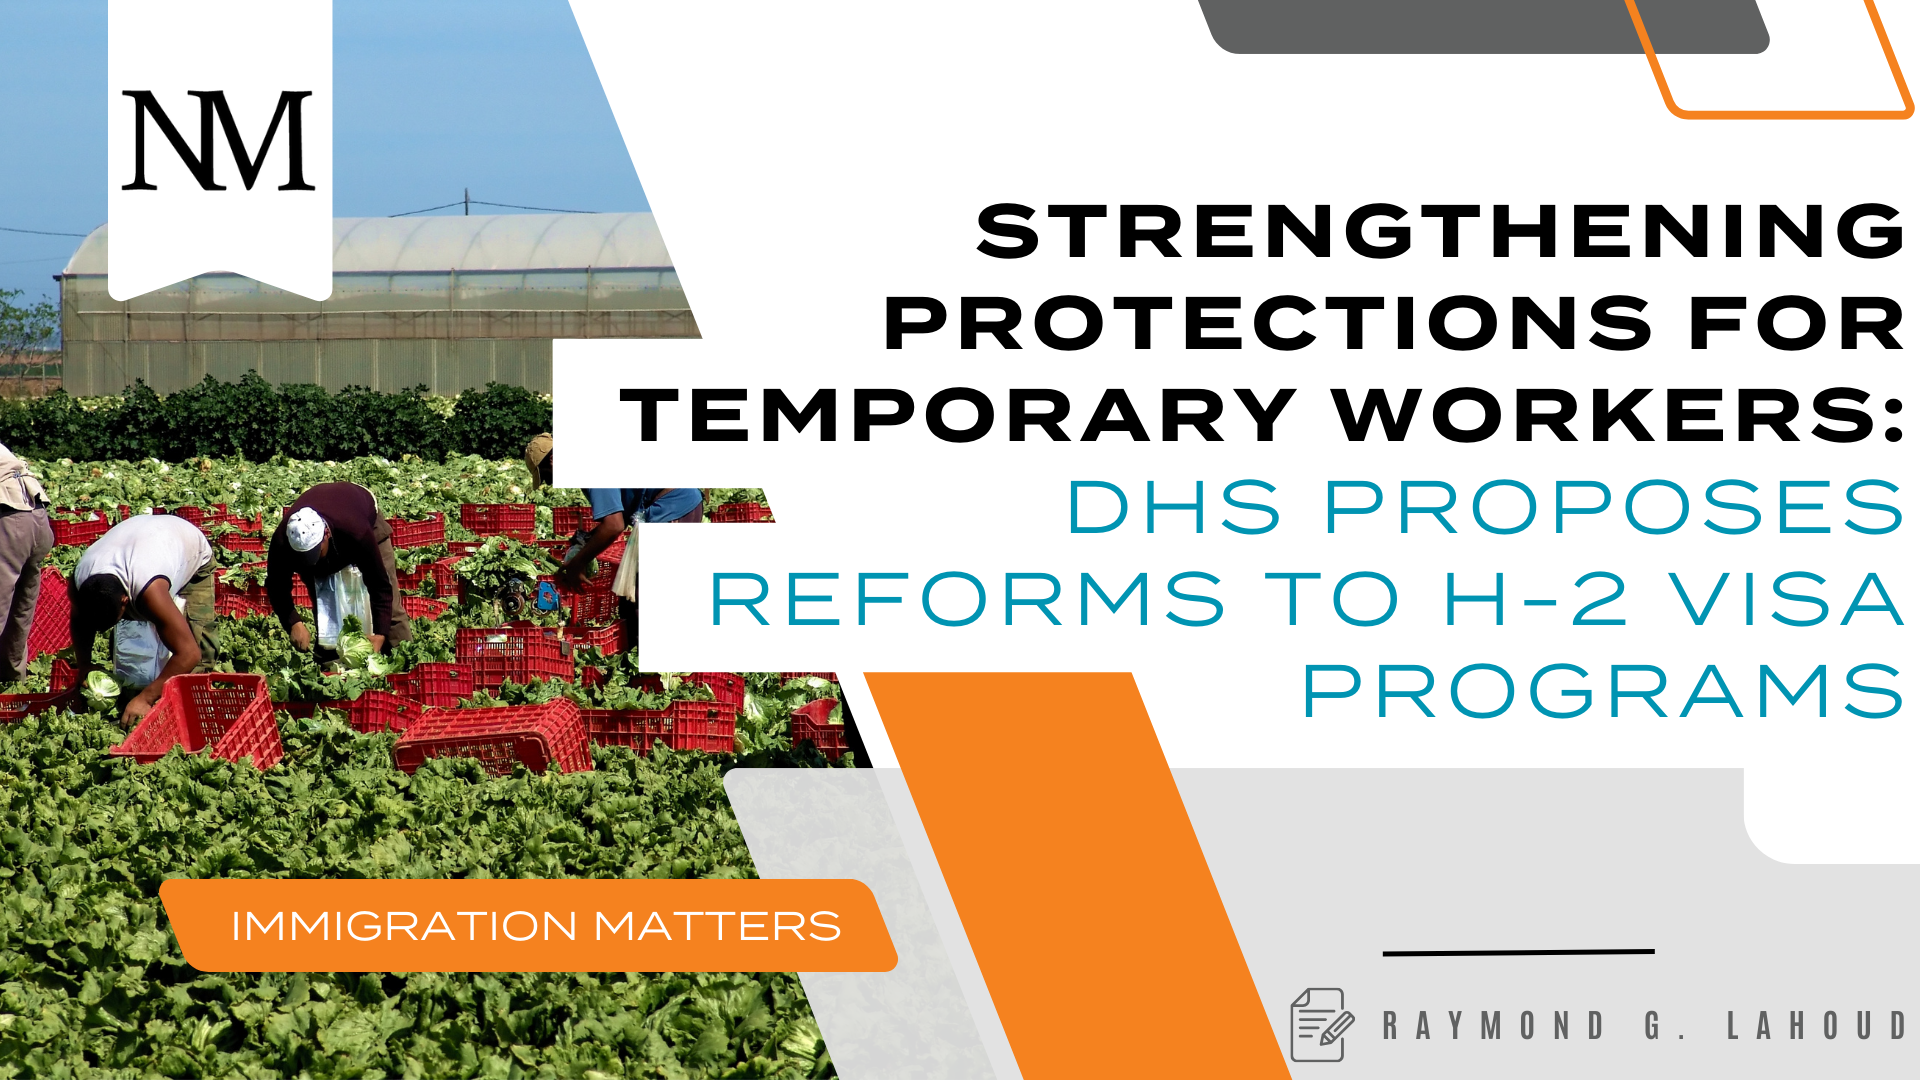 Strengthening Protections for Temporary Workers: DHS Proposes Reforms to H-2 Visa Programs